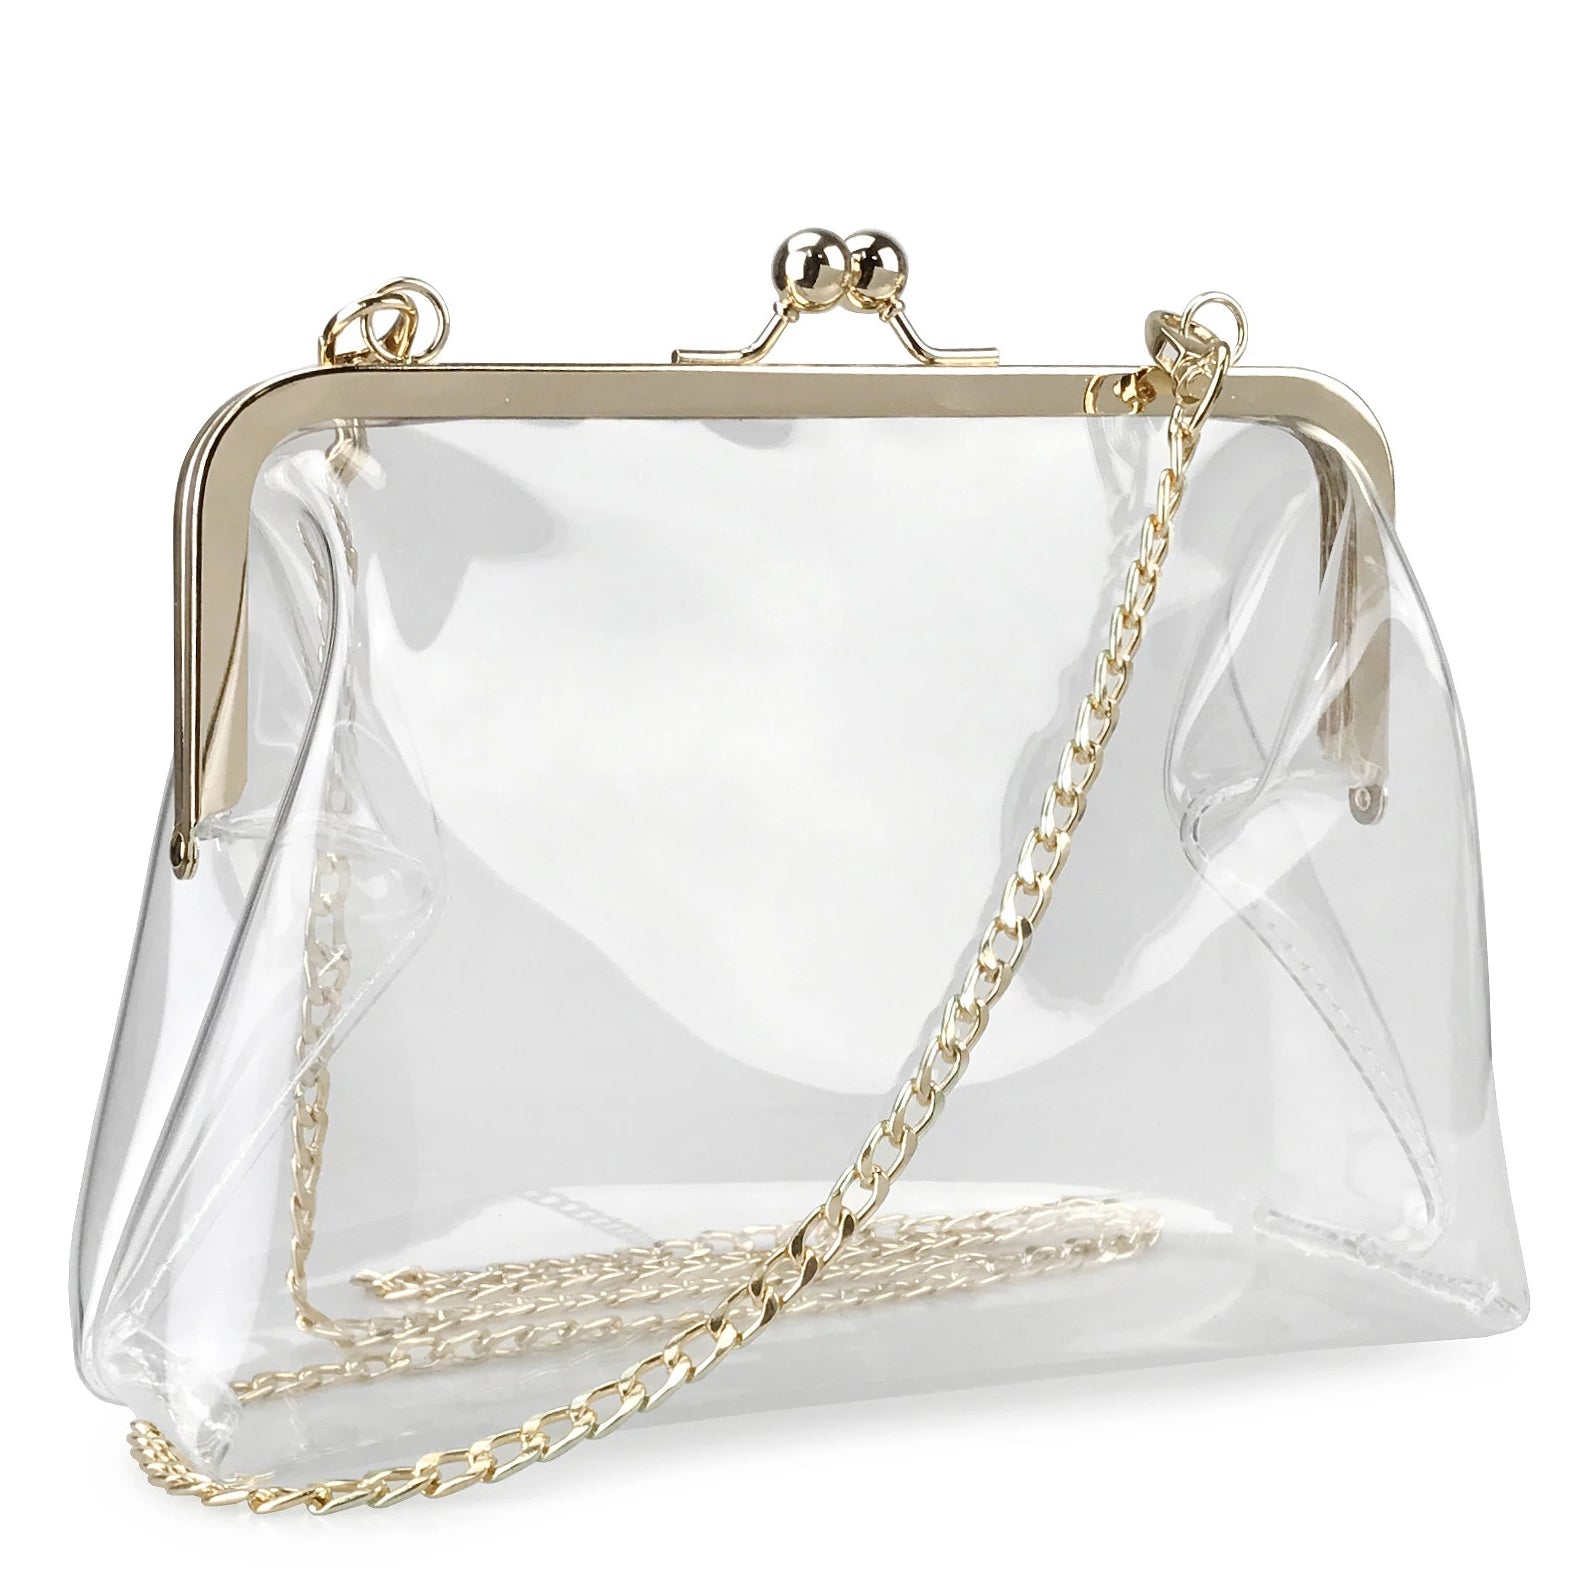 Pvc transparent fashion clutch bags with chain strap in India